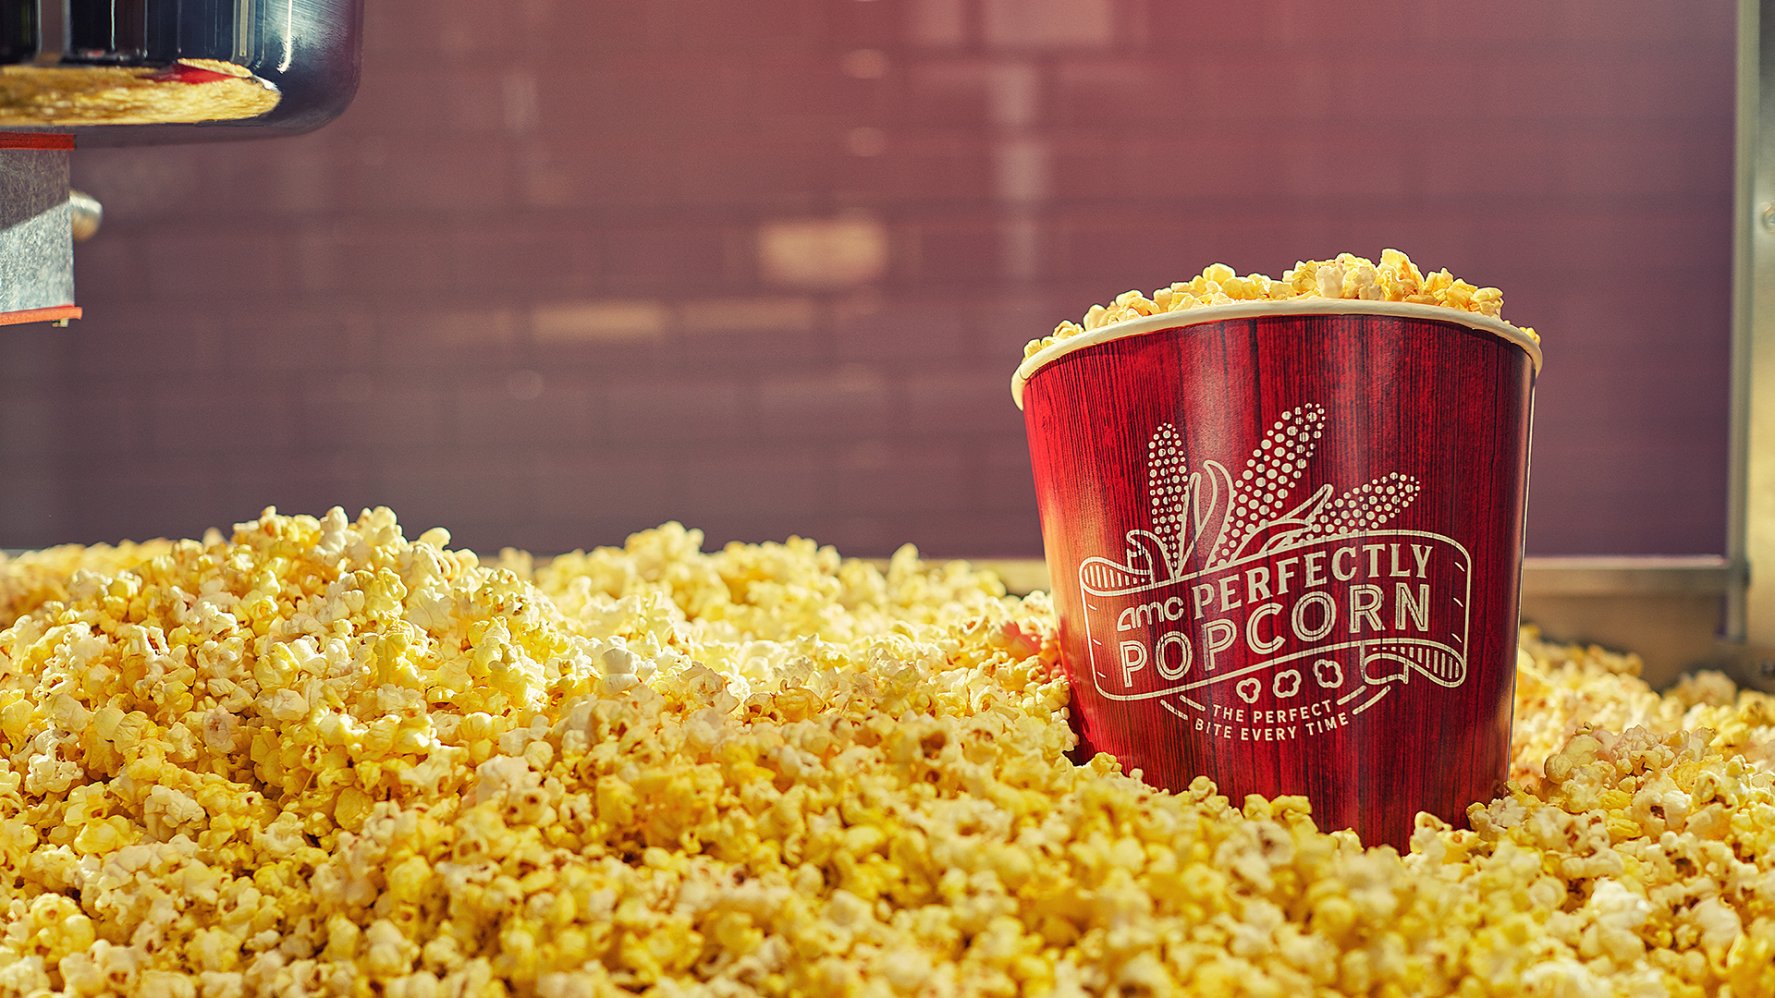 amc-theatres-introduces-all-you-can-eat-popcorn-promo-nbc-7-san-diego